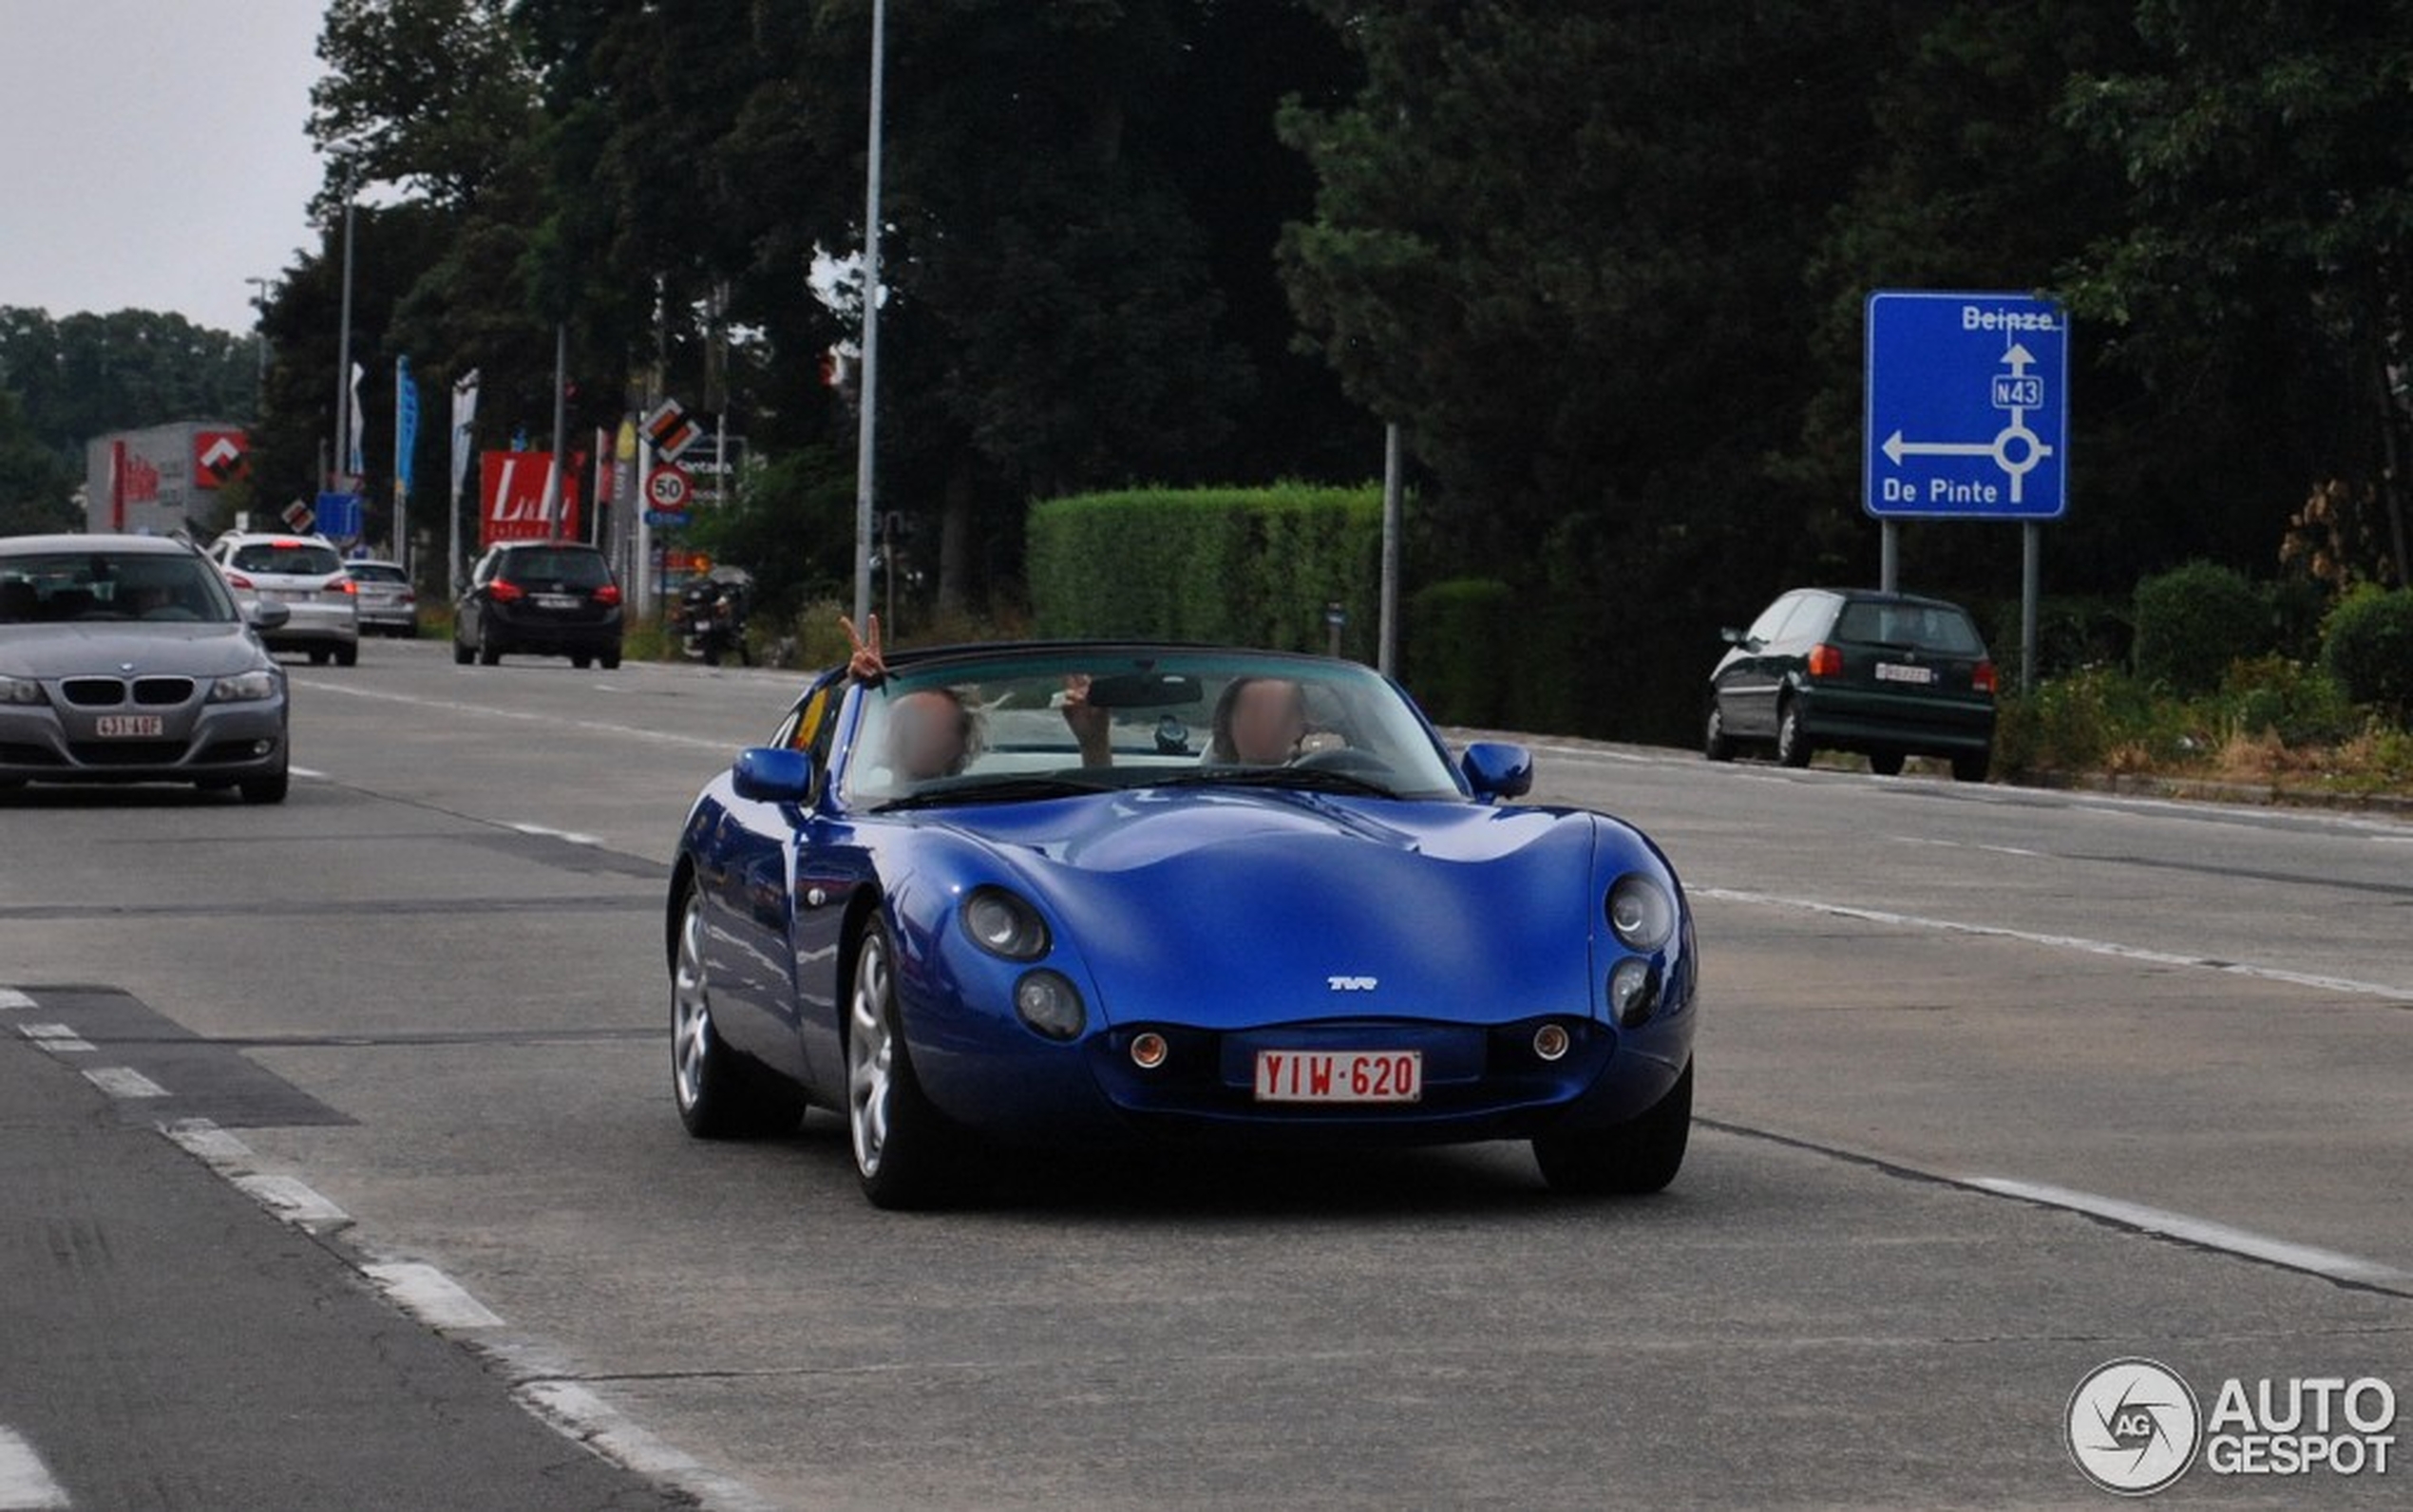 TVR Tuscan MKII